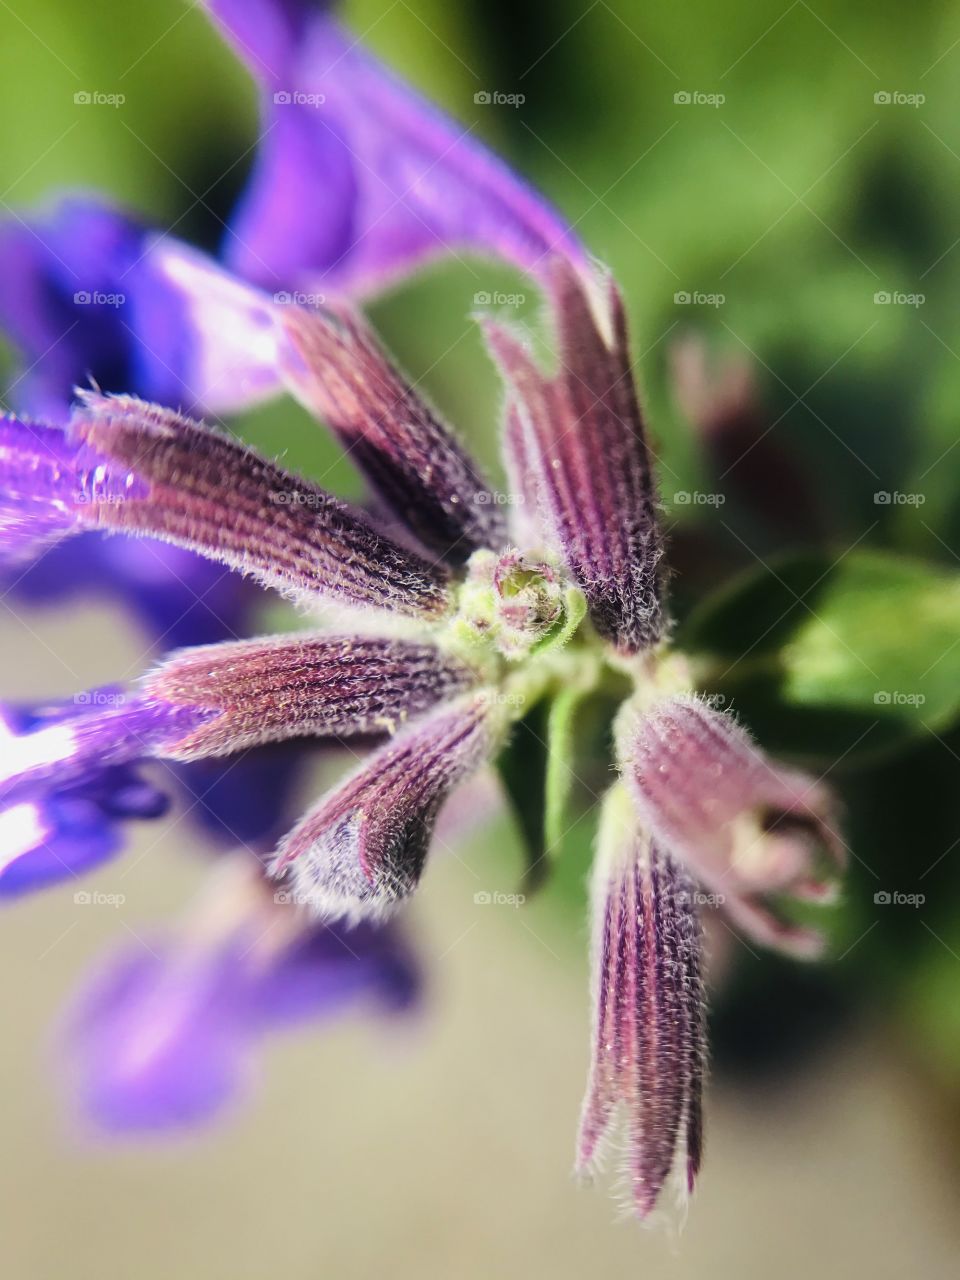 This is a very nice fine detail photo of an flower shot on iPhone with the macro lens